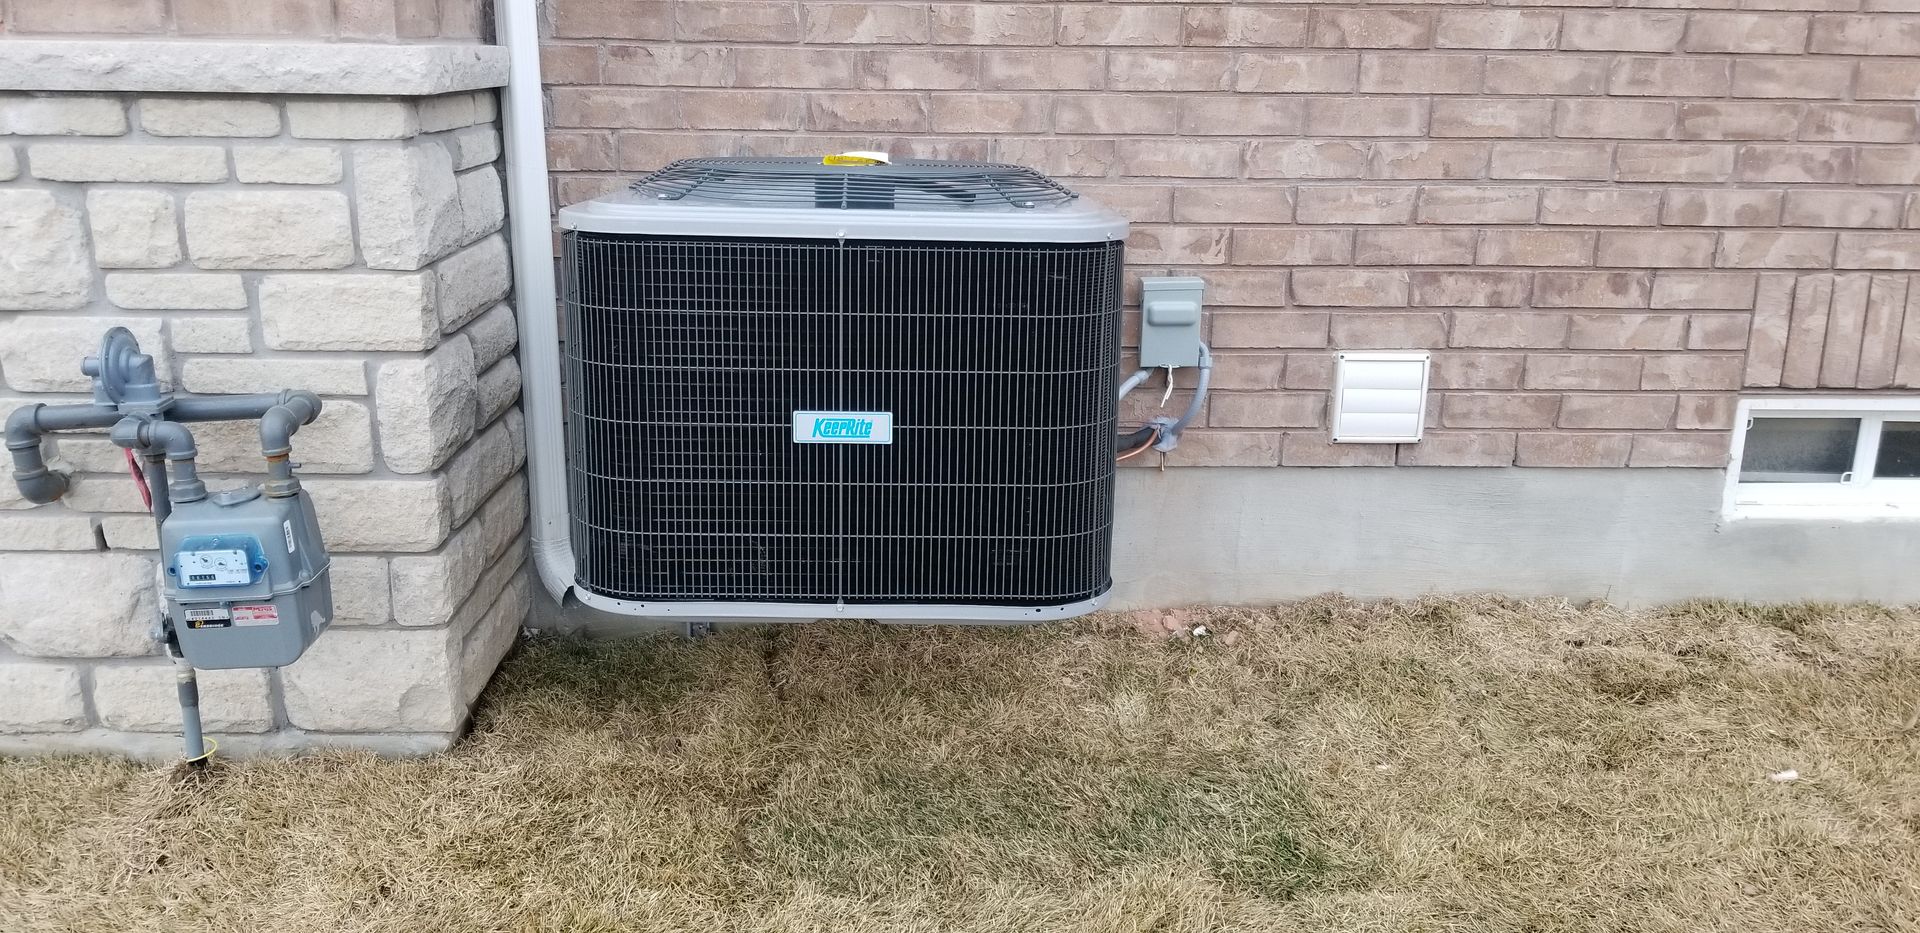 a heat pump is mounted on the side of a brick building.